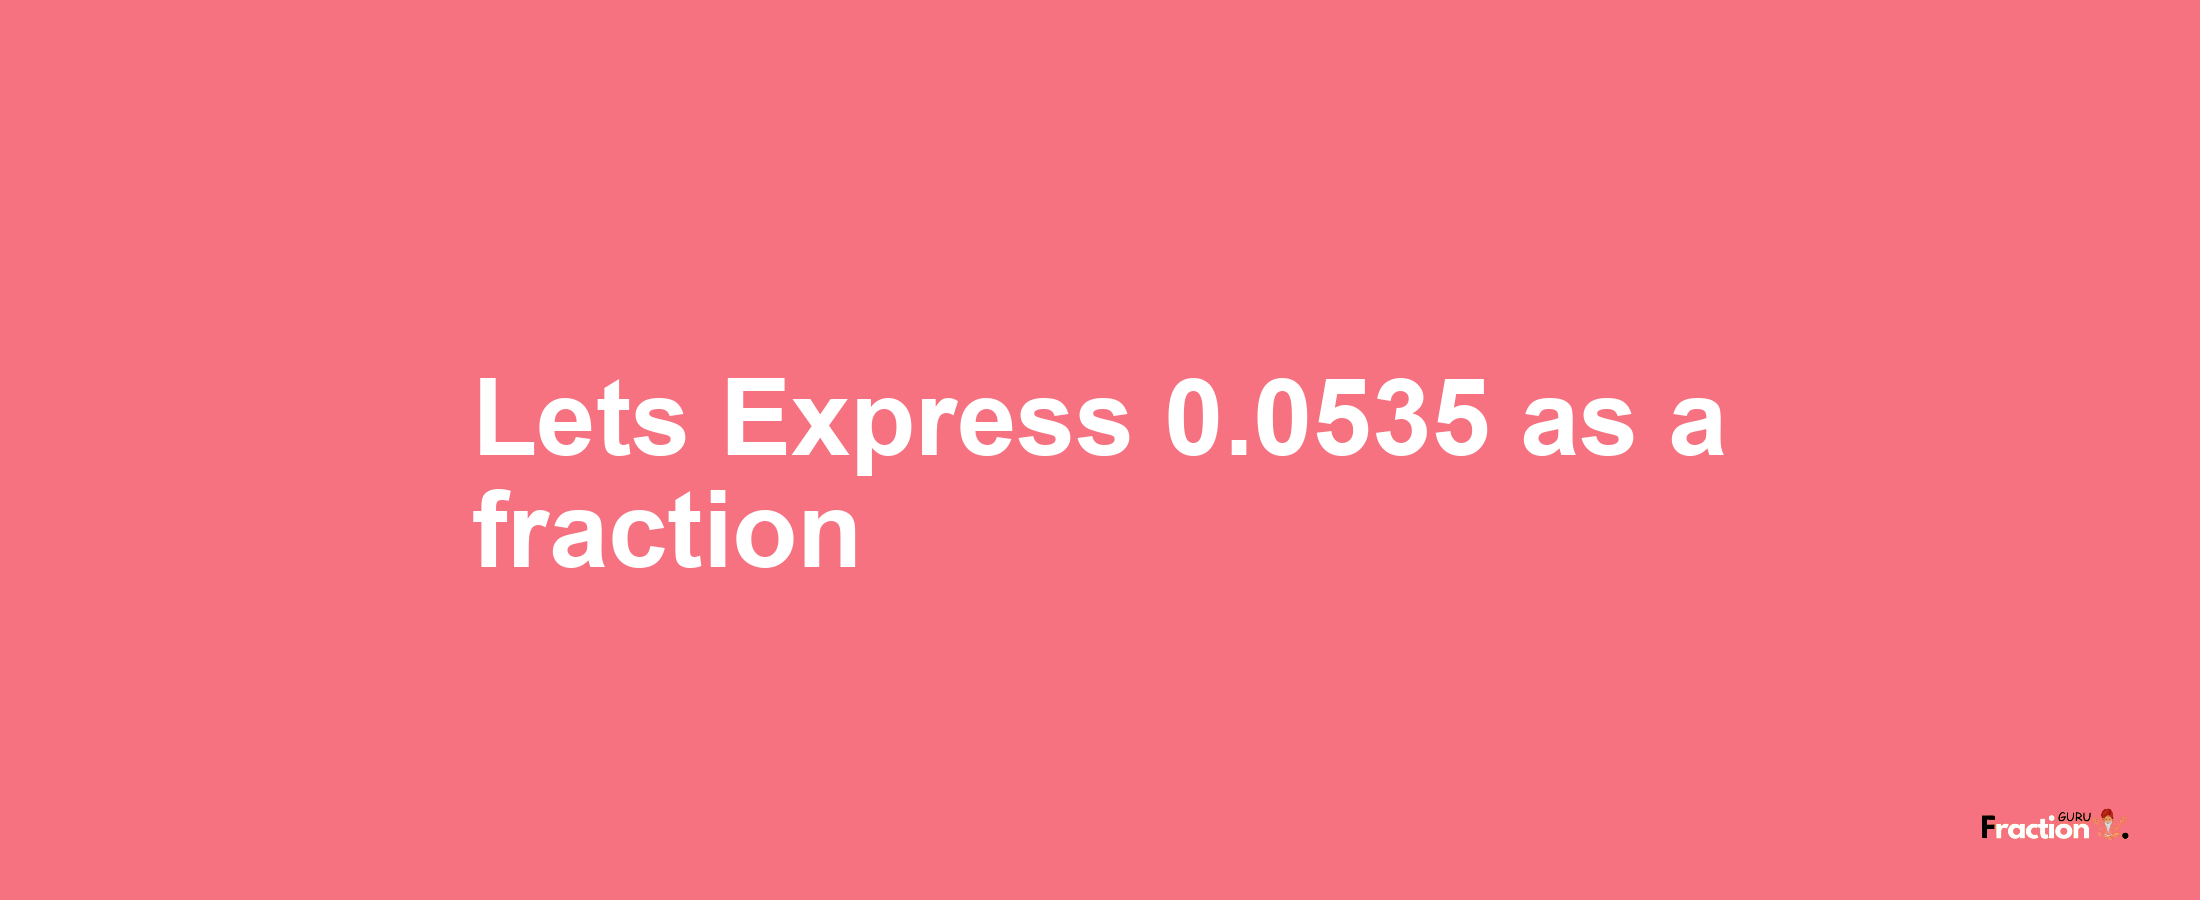 Lets Express 0.0535 as afraction